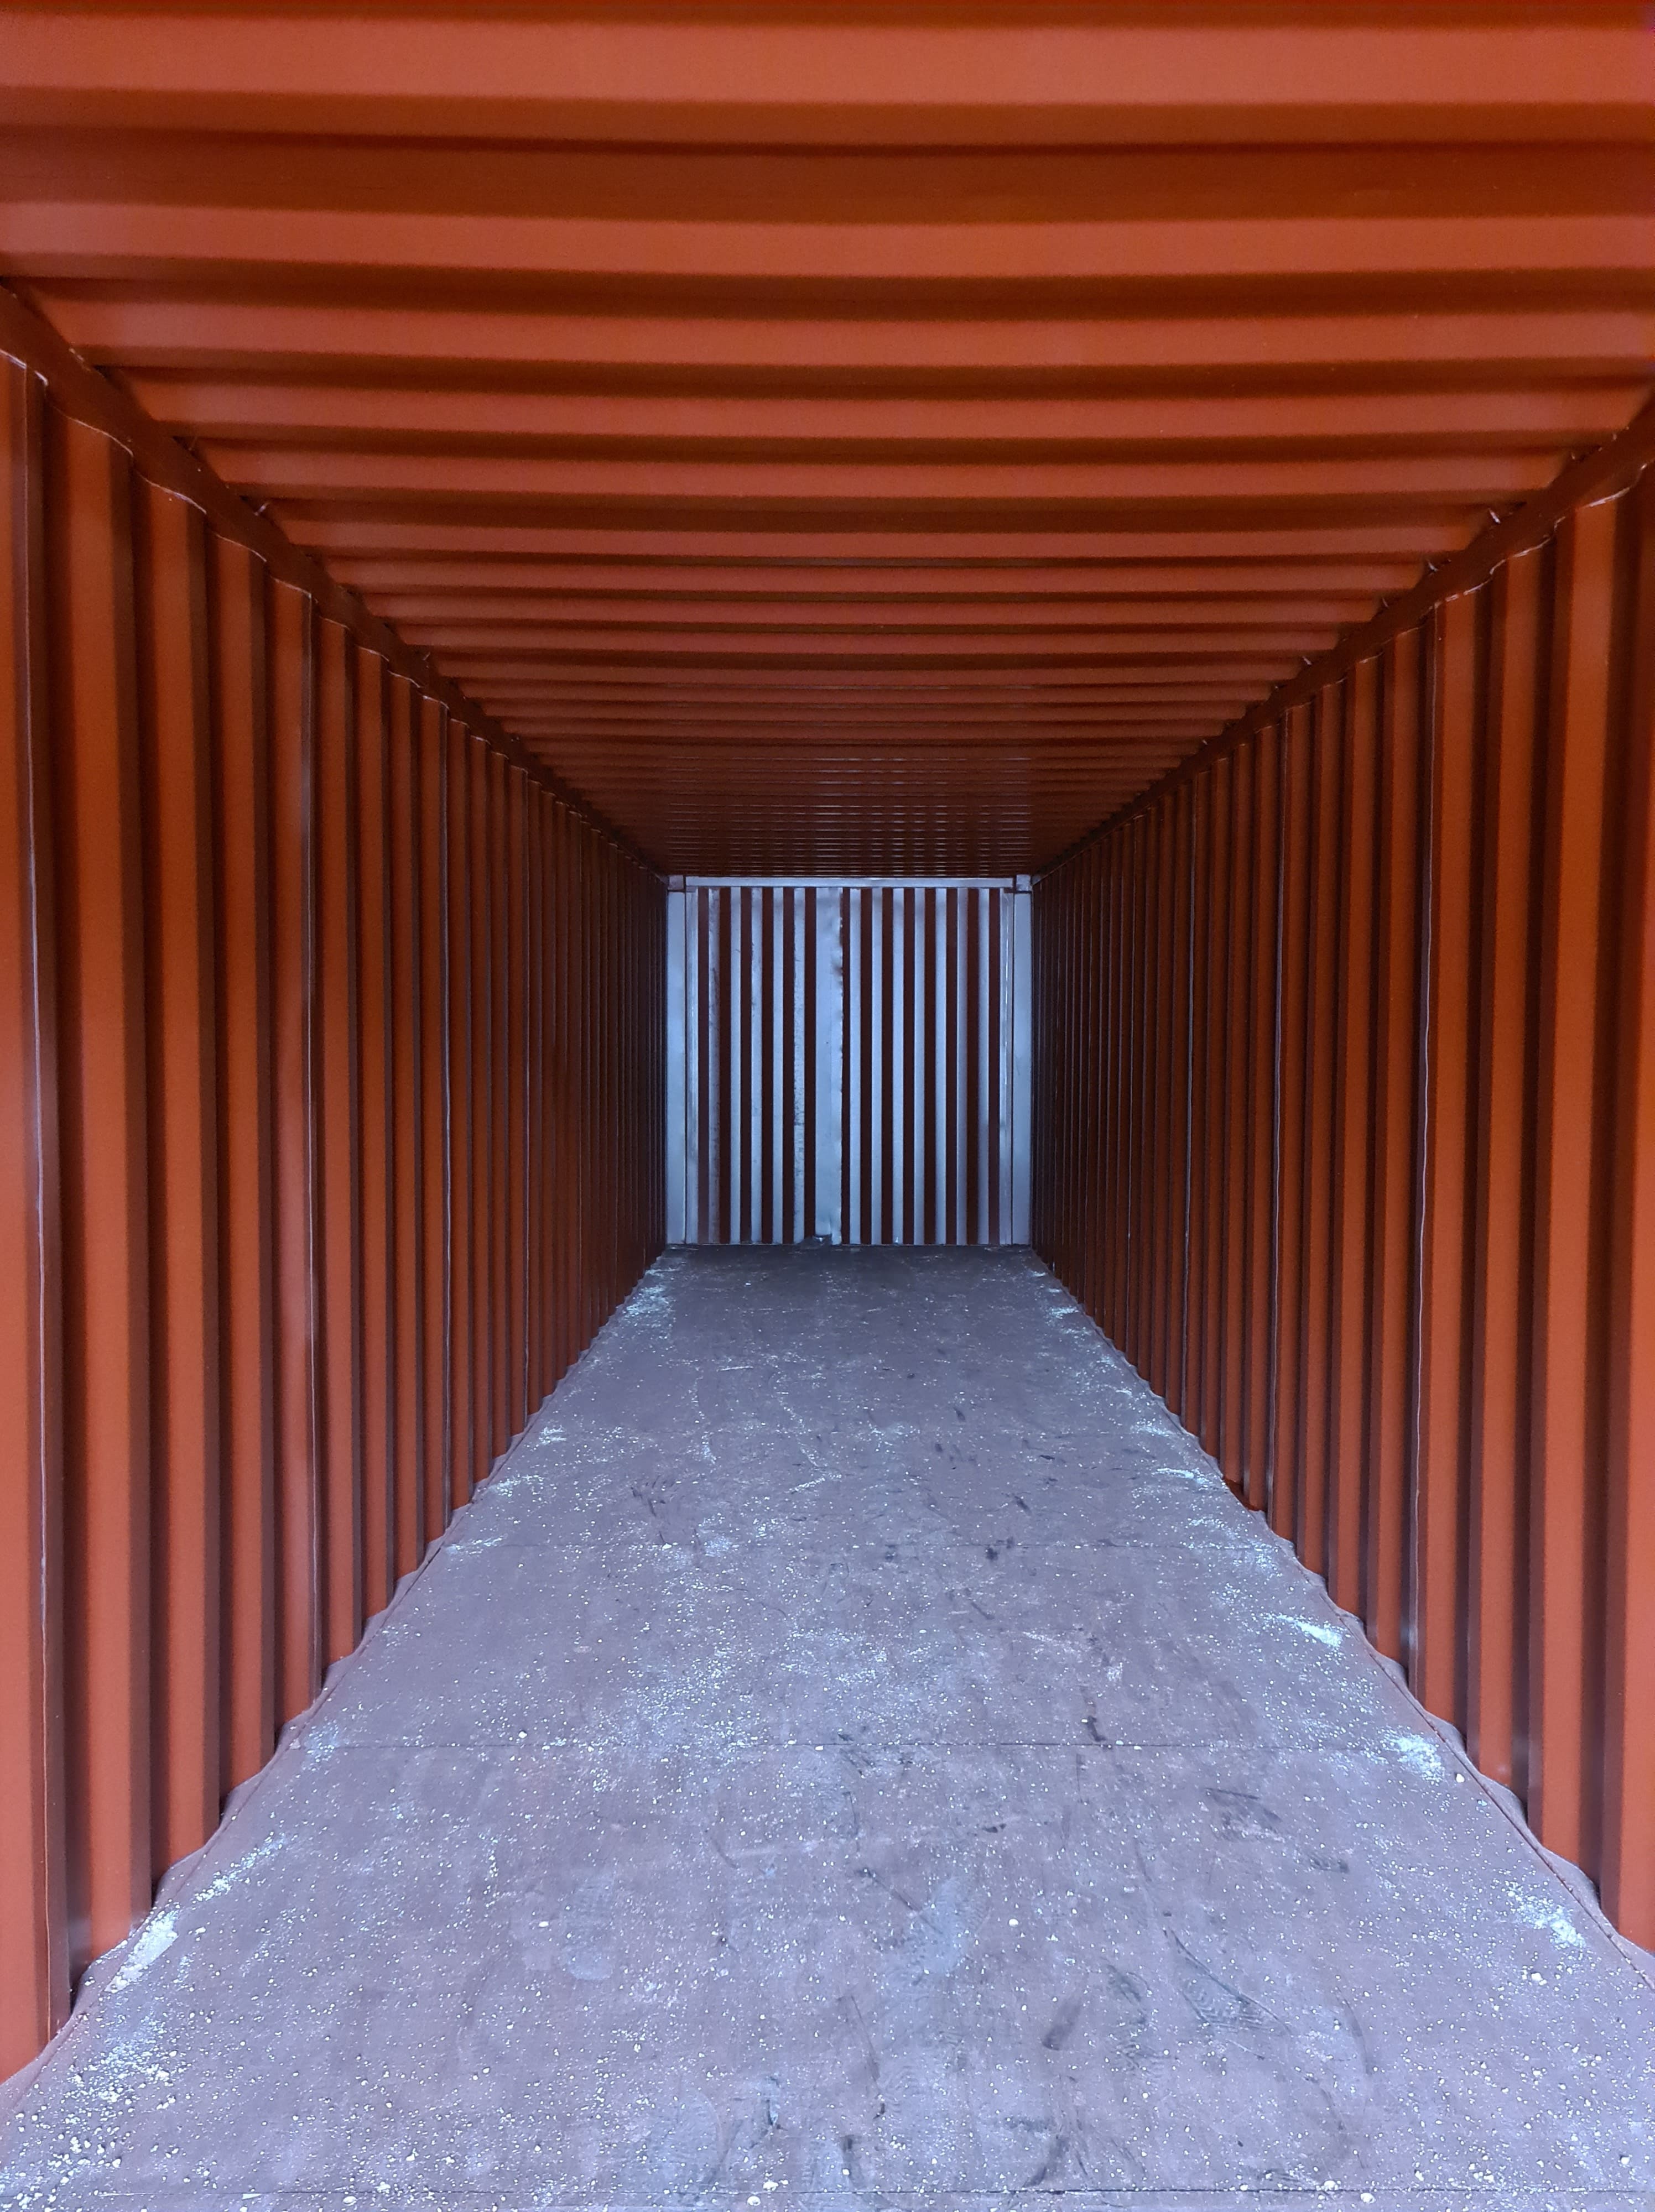 Container kho 40ft